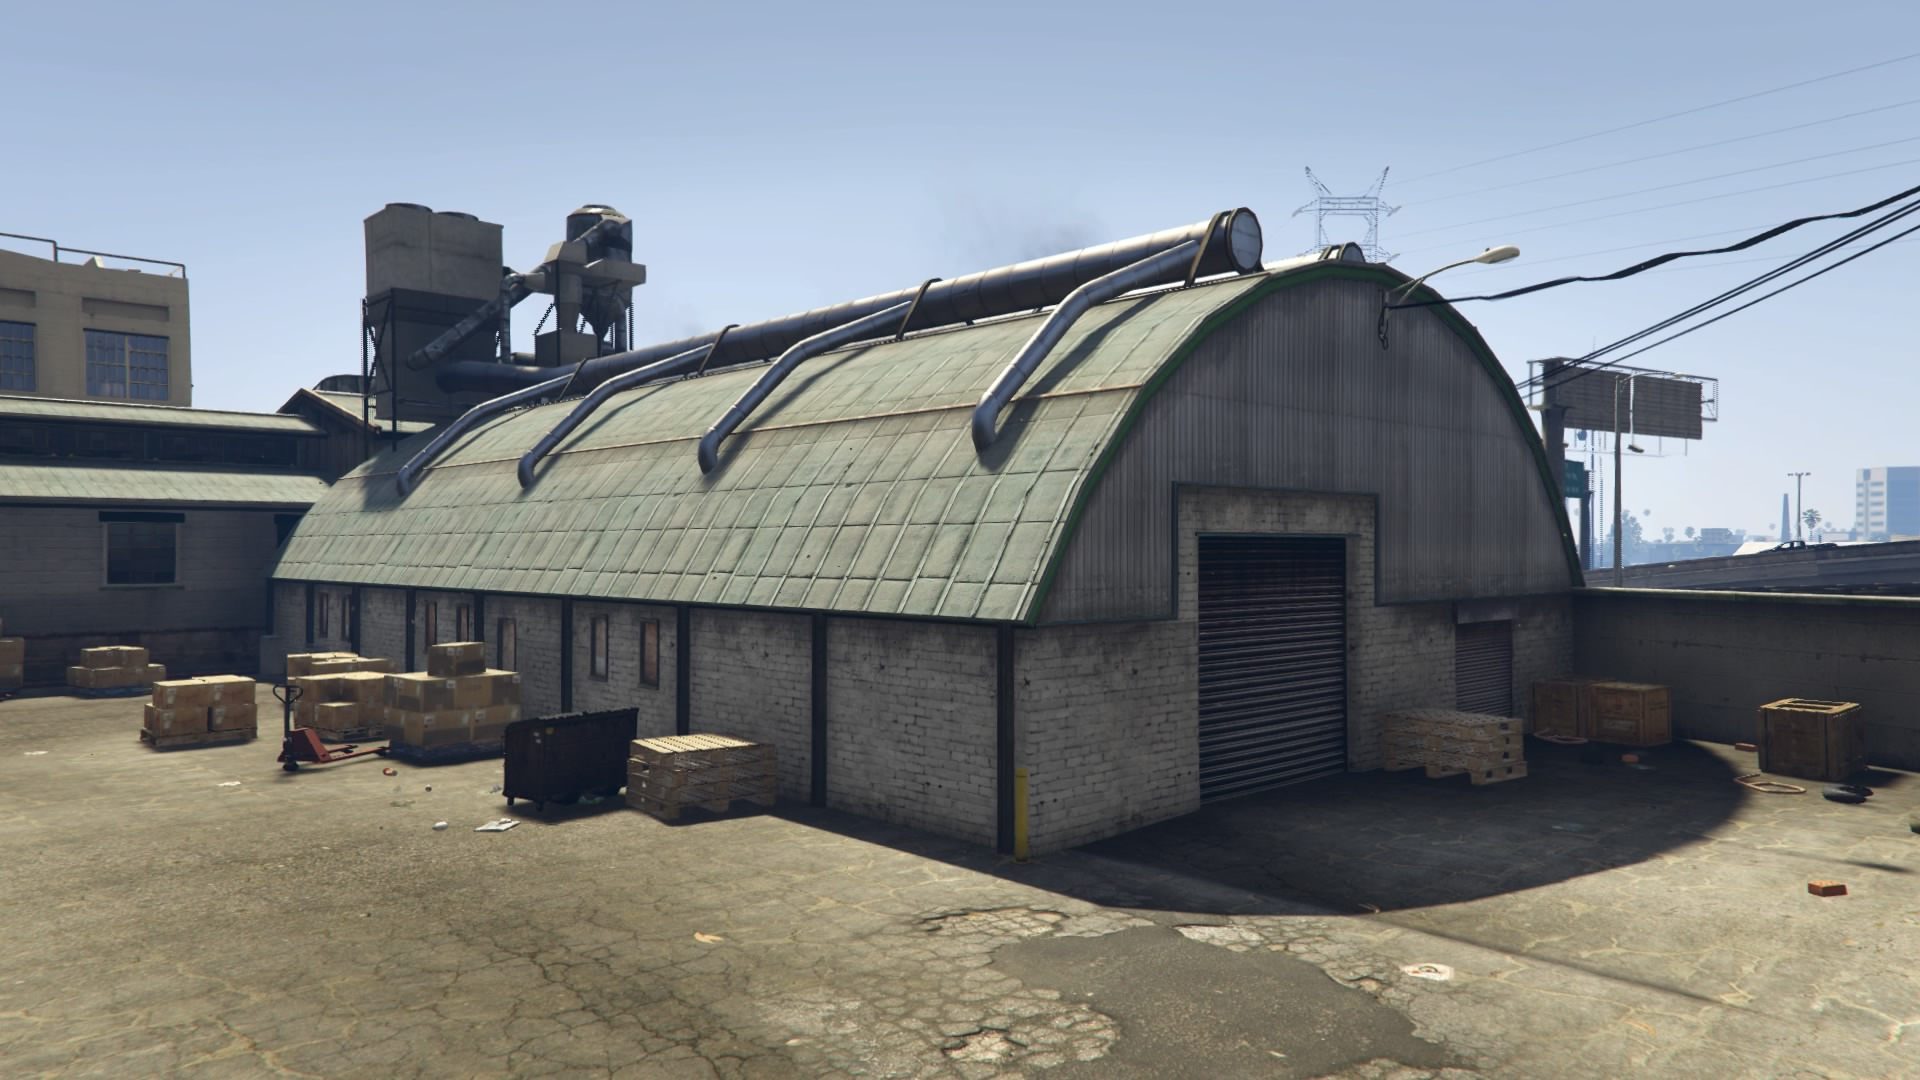 where to buy a warehouse in gta 5 online